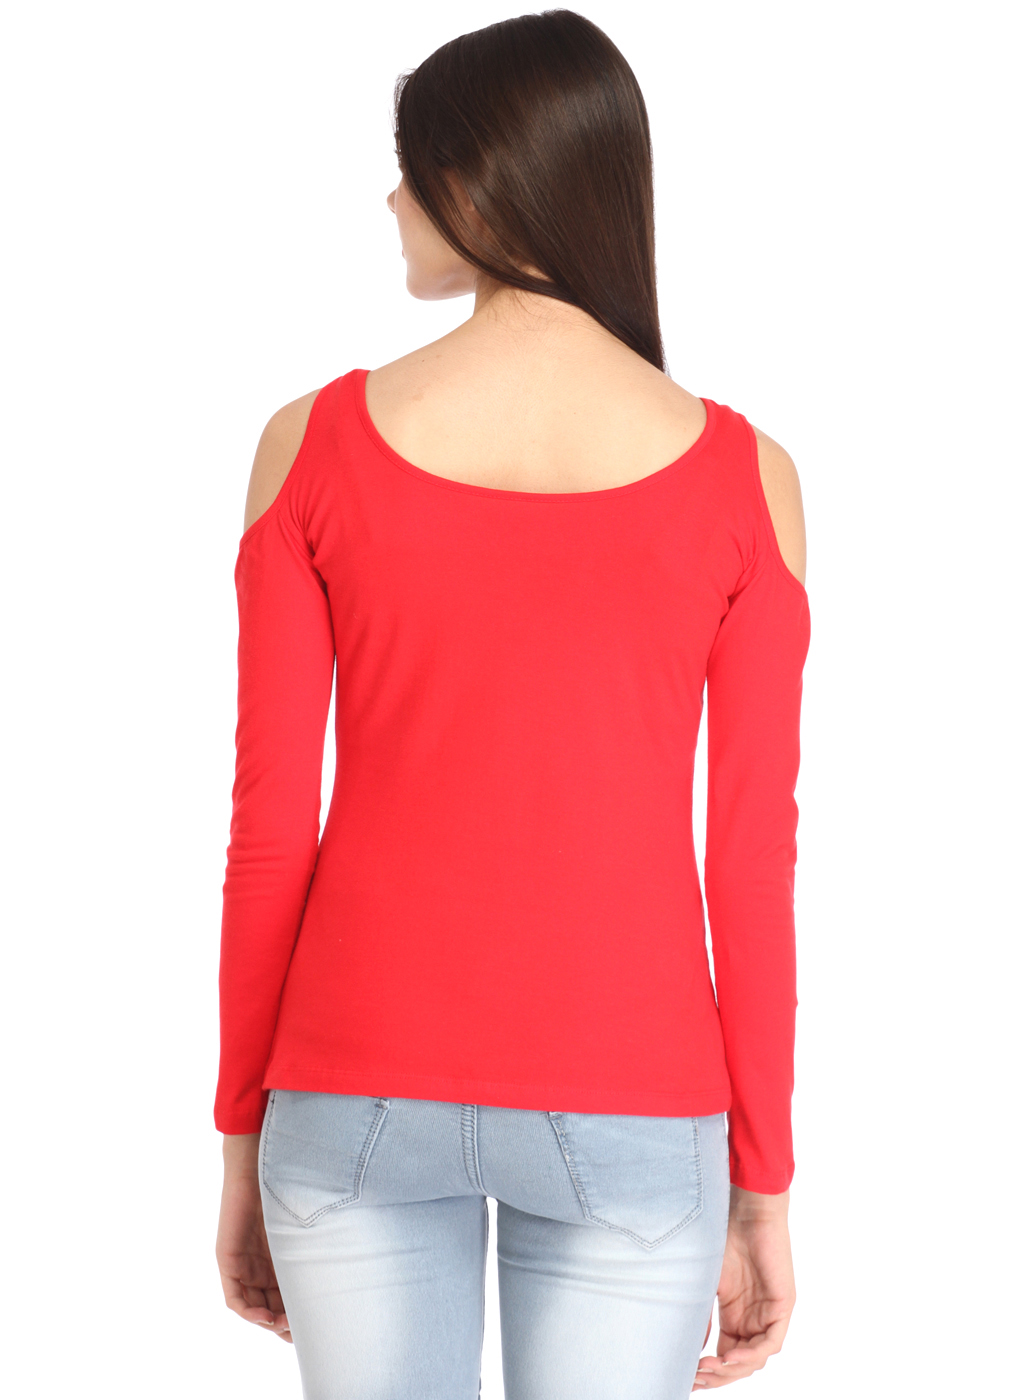 Buy Red Cold Shoulder Top Online @ ₹399 from ShopClues